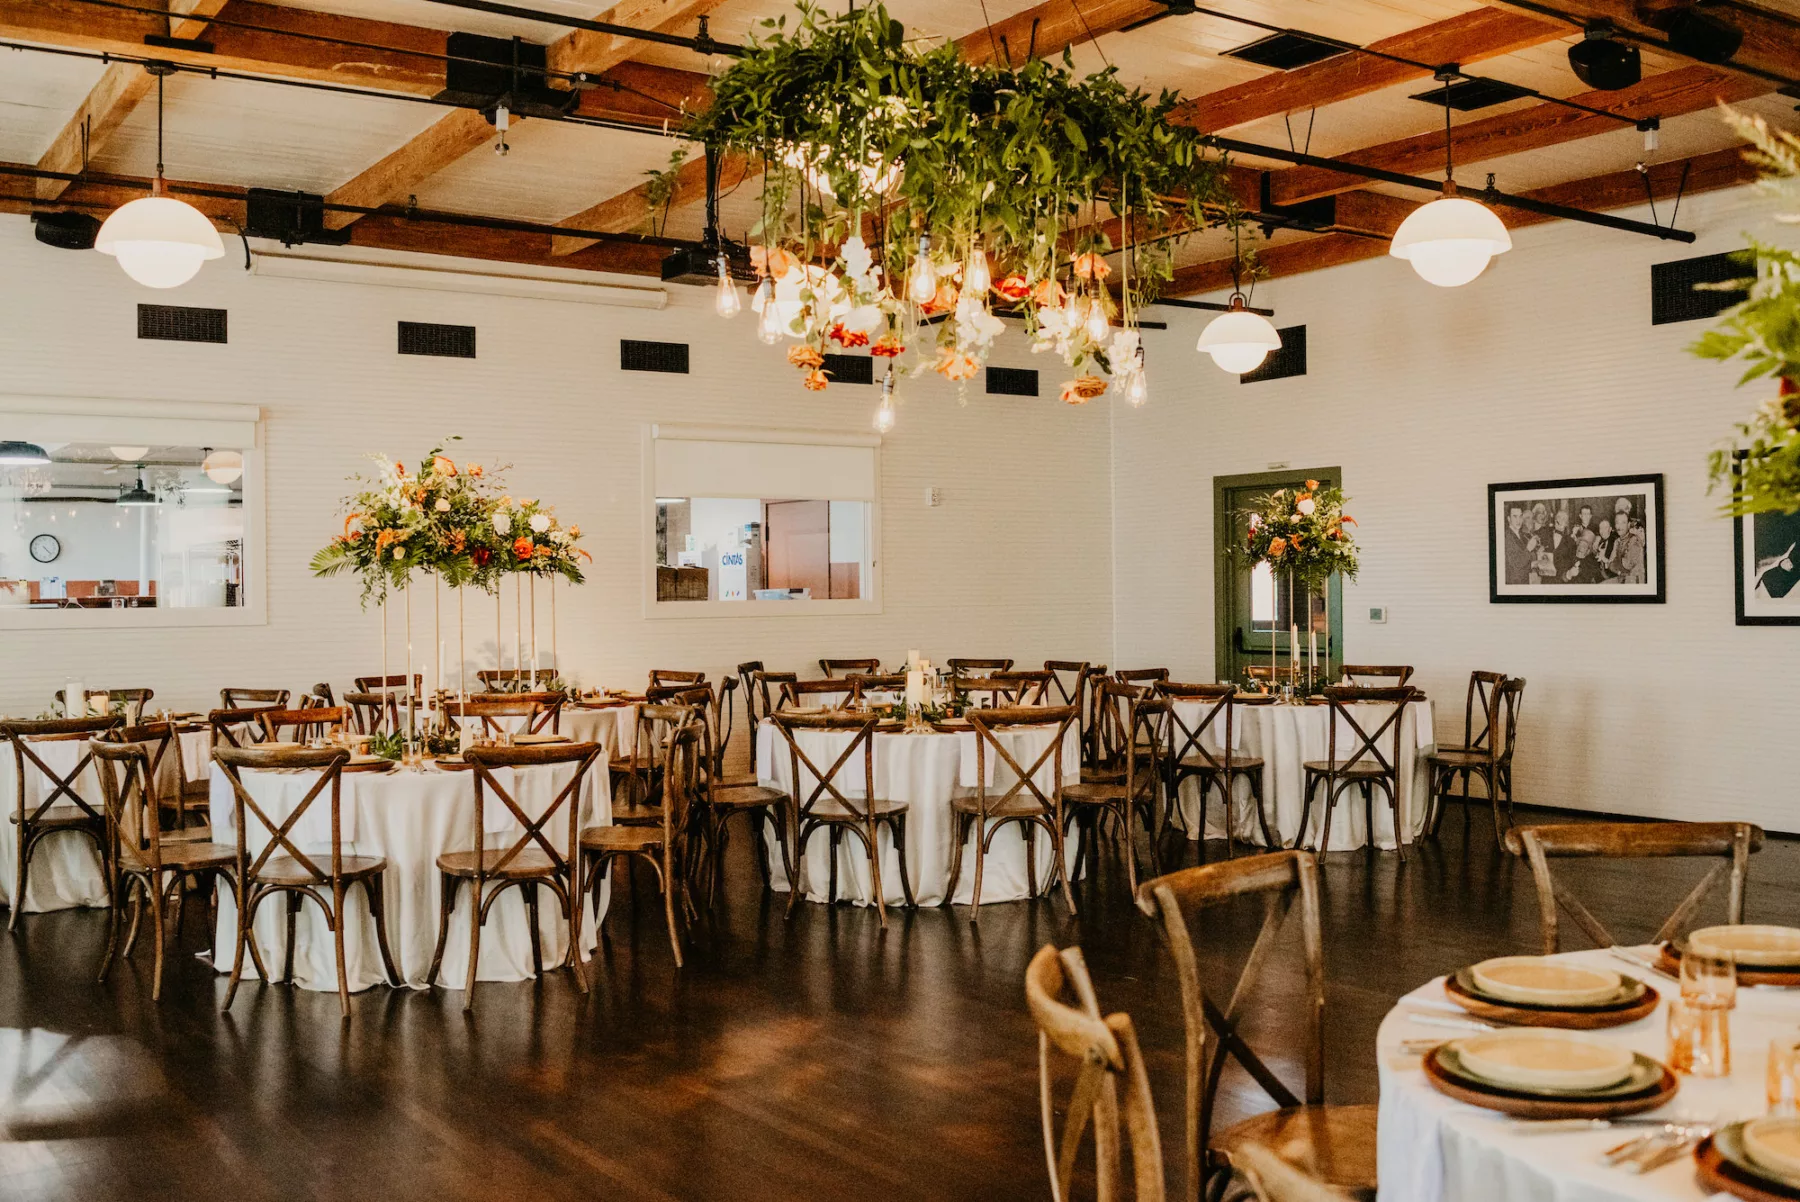 Boho Industrial Wedding Reception Decor Inspiration | Gold Flower Stands with White Roses, Terracotta Amaranthus, and Greenery | Orange and White Rose Flower Chandelier Inspiration | Wooden Crossback Chairs | Tampa Bay Furniture Kate Ryan Event Rentals | Ybor Planner B Eventful | Historic Industrial Venue J.C. Newman Cigar Co.